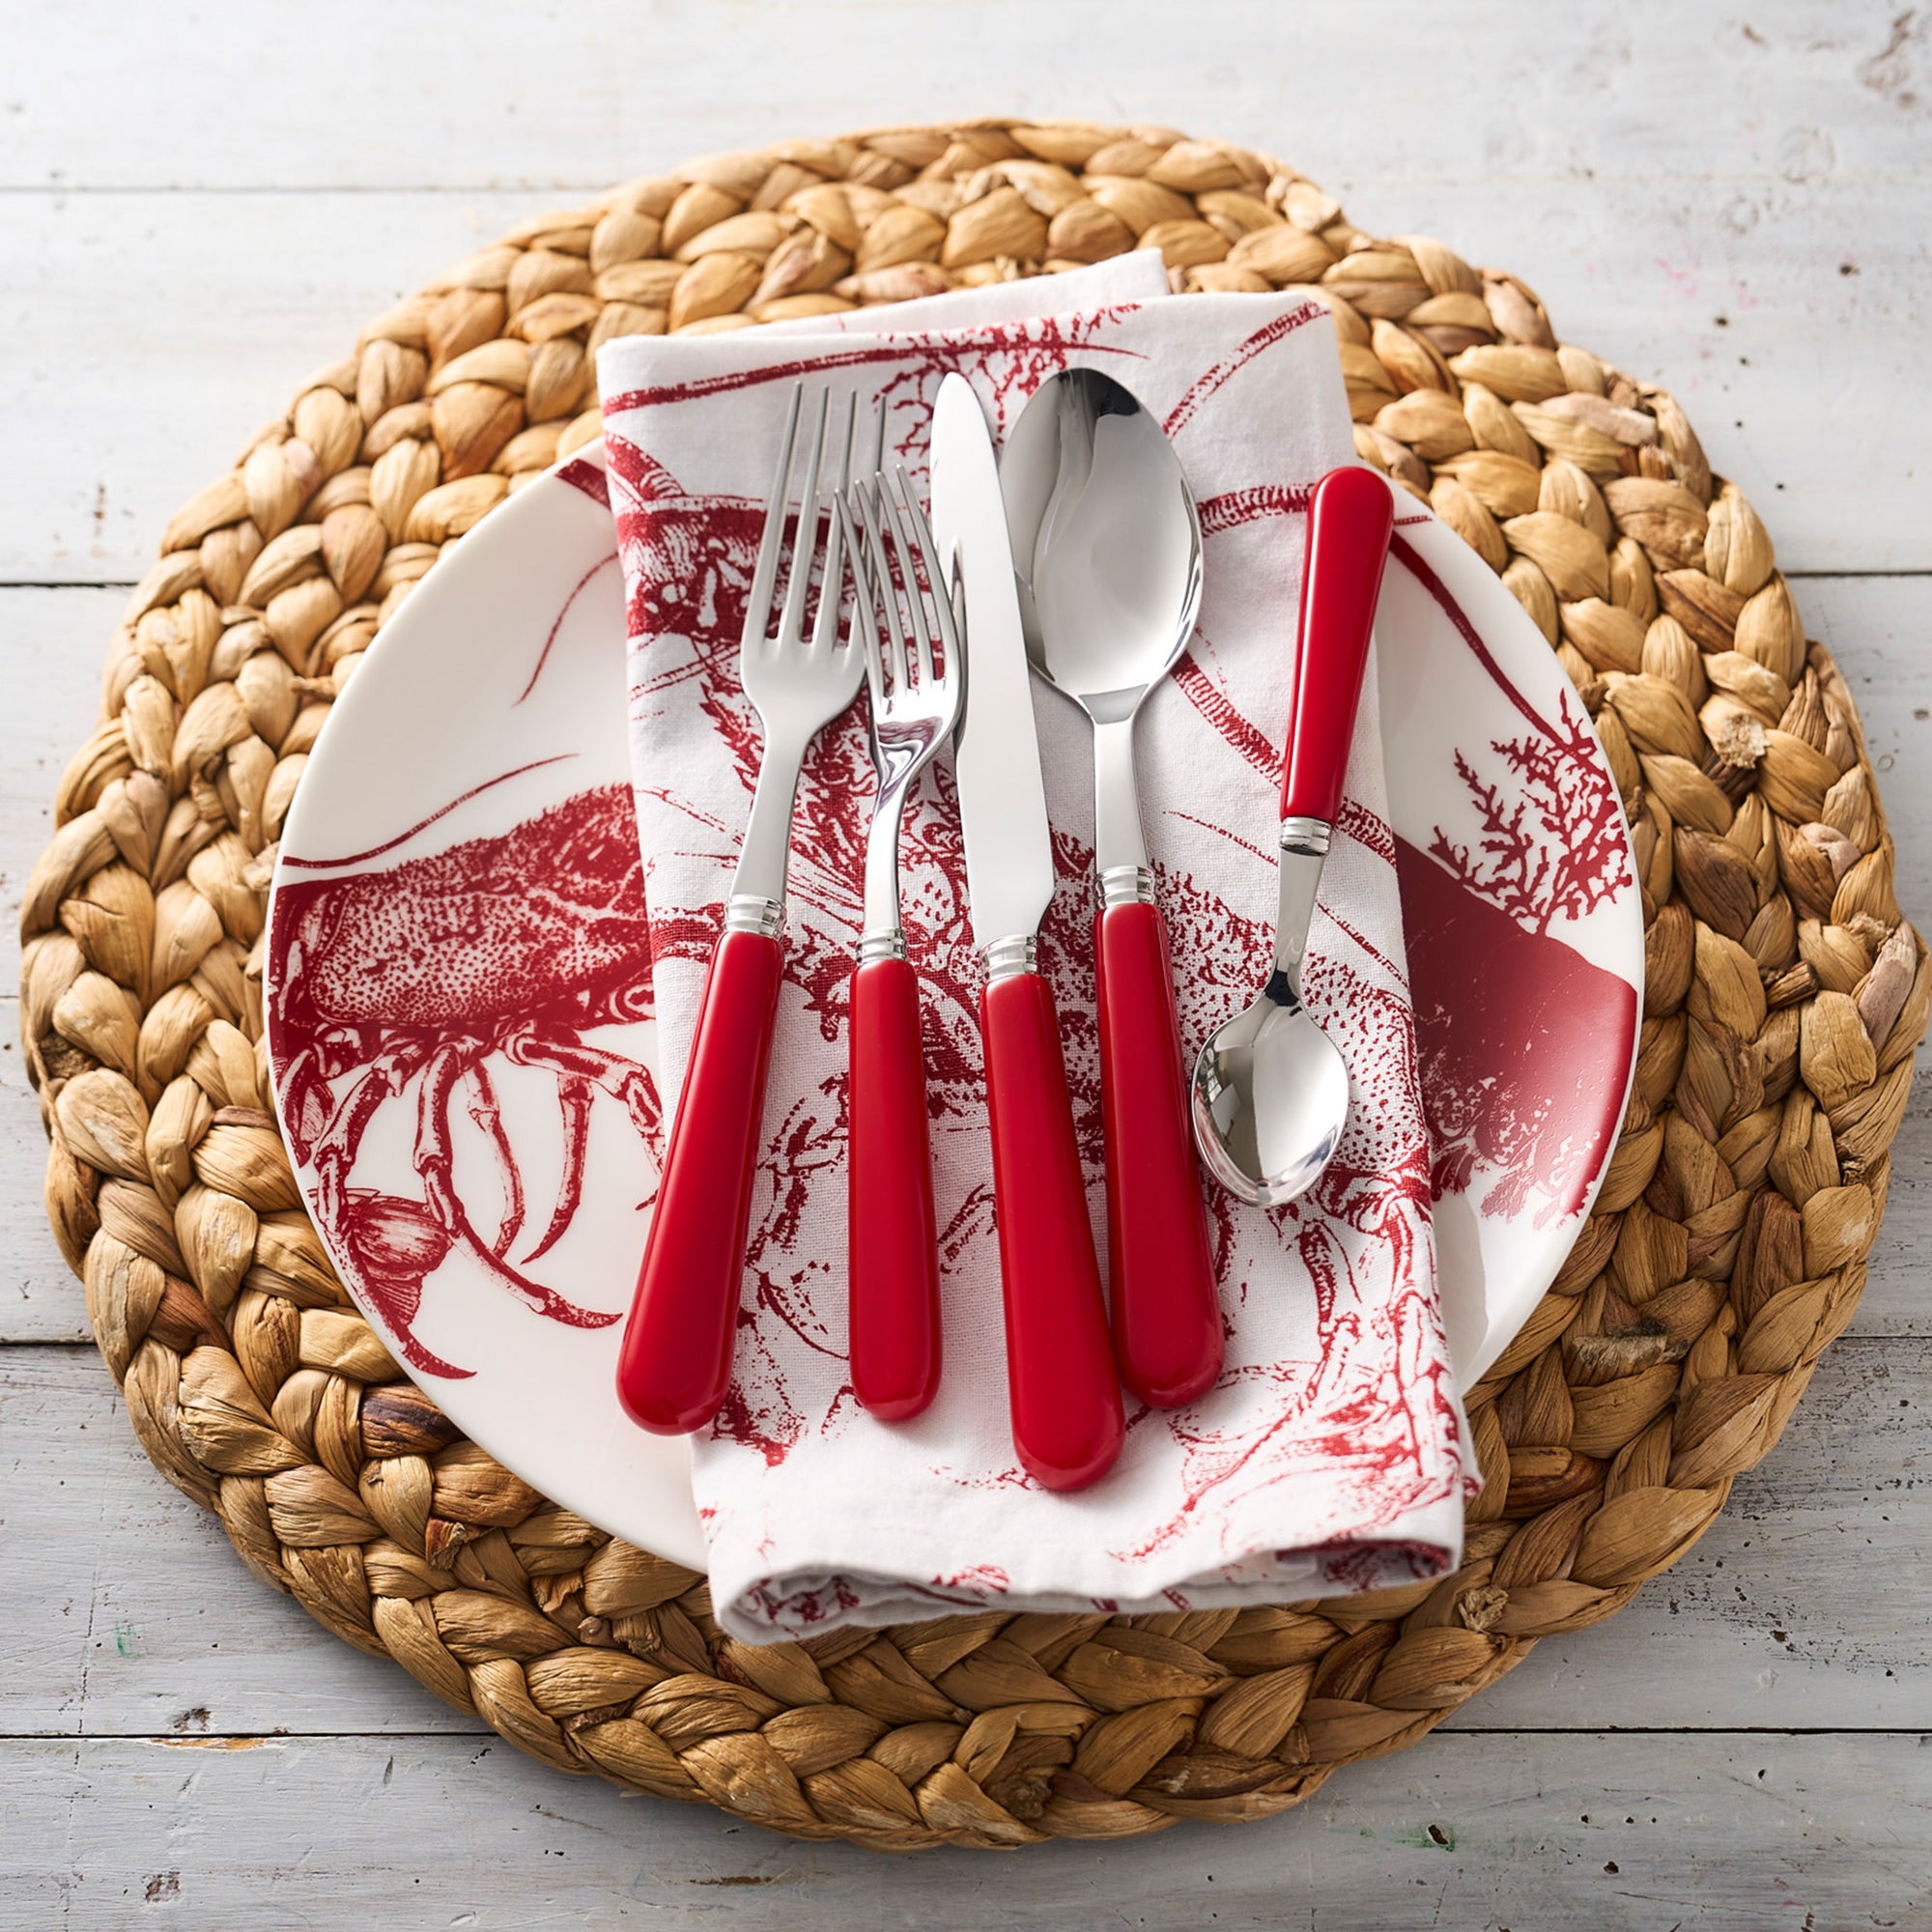 The Caskata Lobster Coupe Dinner Plate features a red illustration of two lobsters and seaweed, making it both dishwasher and microwave safe.